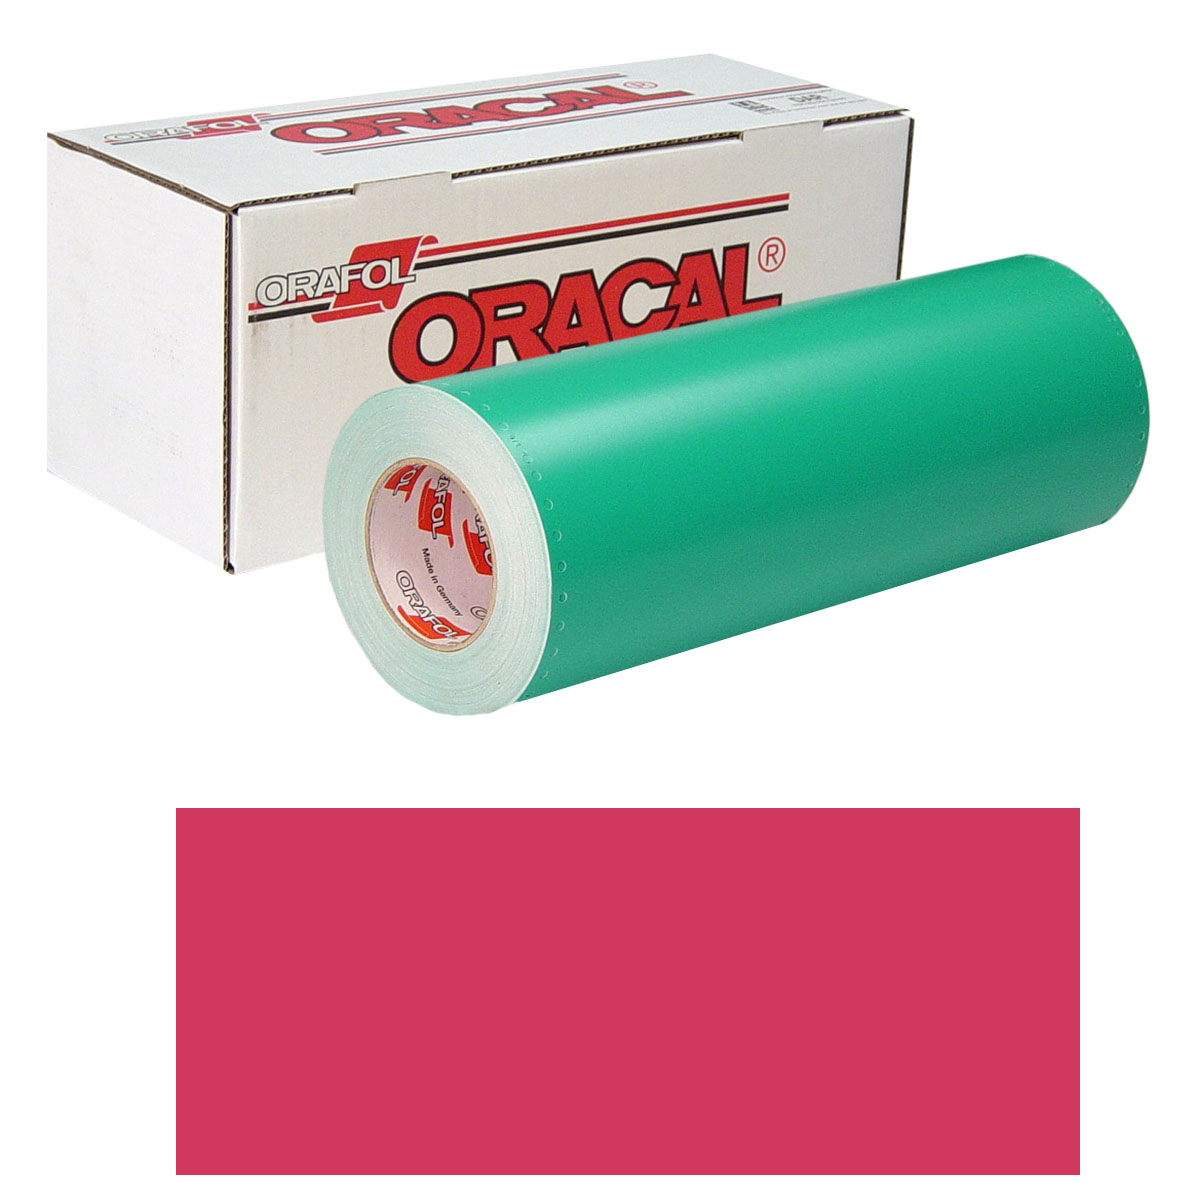 ORACAL 8500 30in X 10yd 032 Light Red